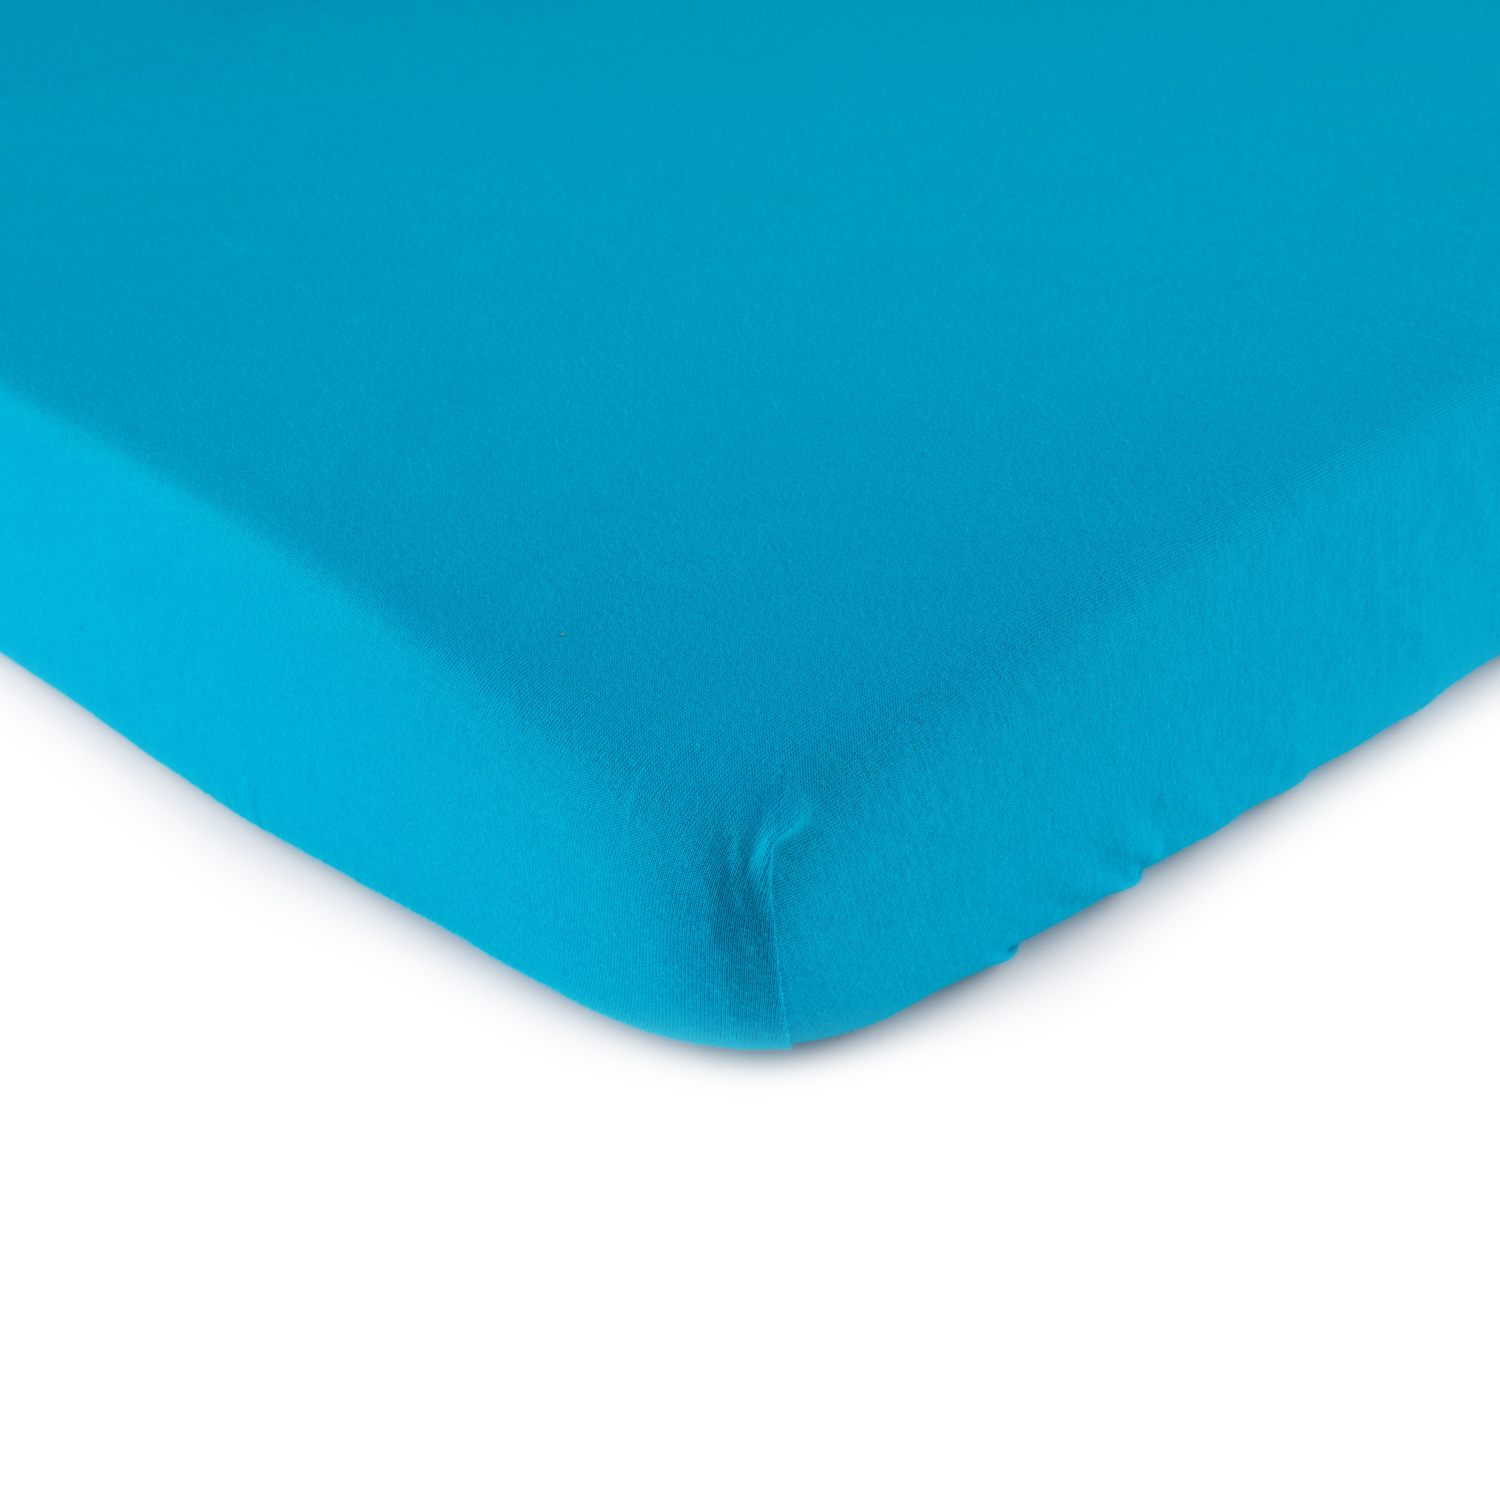 SheetWorld Fitted 100% Cotton Jersey Pack N Play Sheet Fits Graco Square Play Yard 36 x 36, Turquoise - image 1 of 7